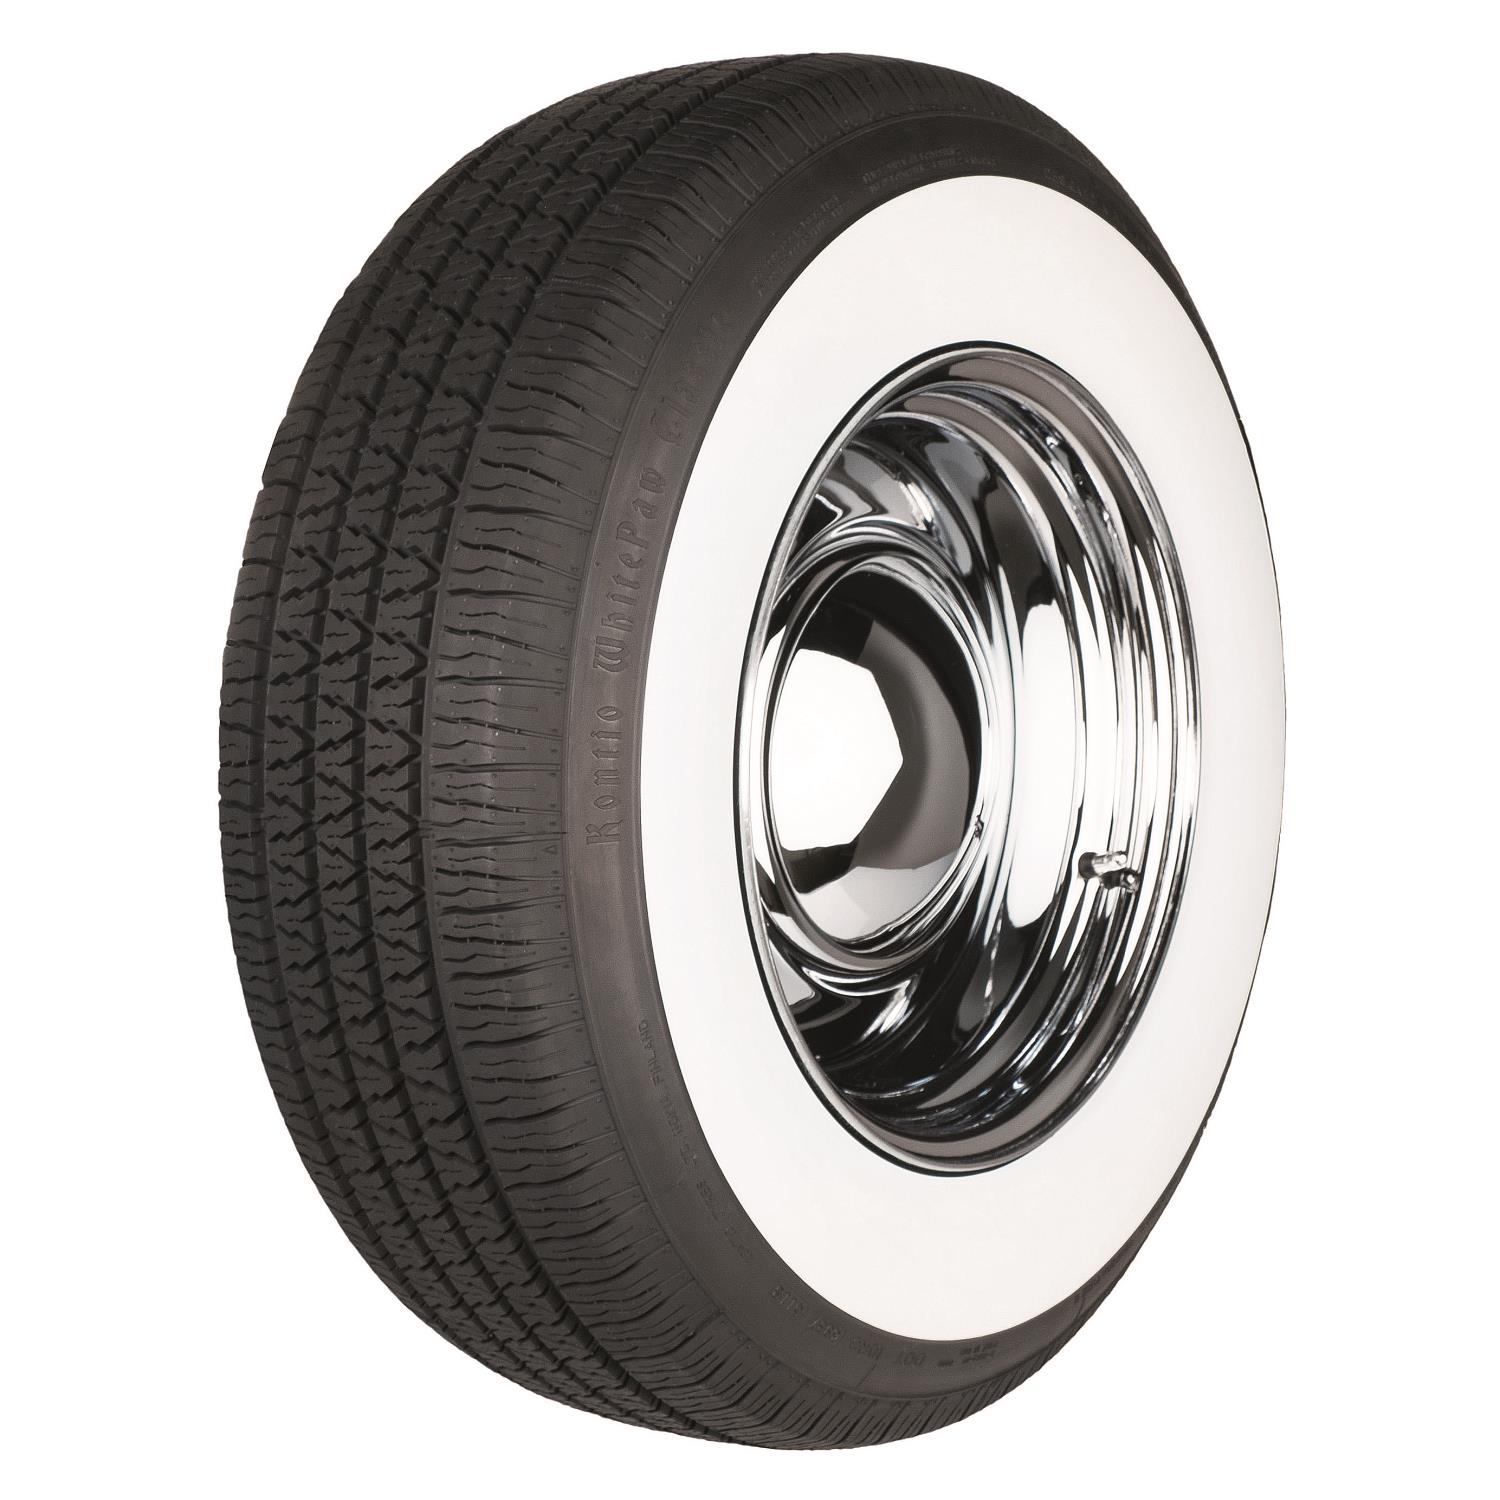 WhitePaw Classic Wide Radial Tire, 185/80R13 [Whitewall]